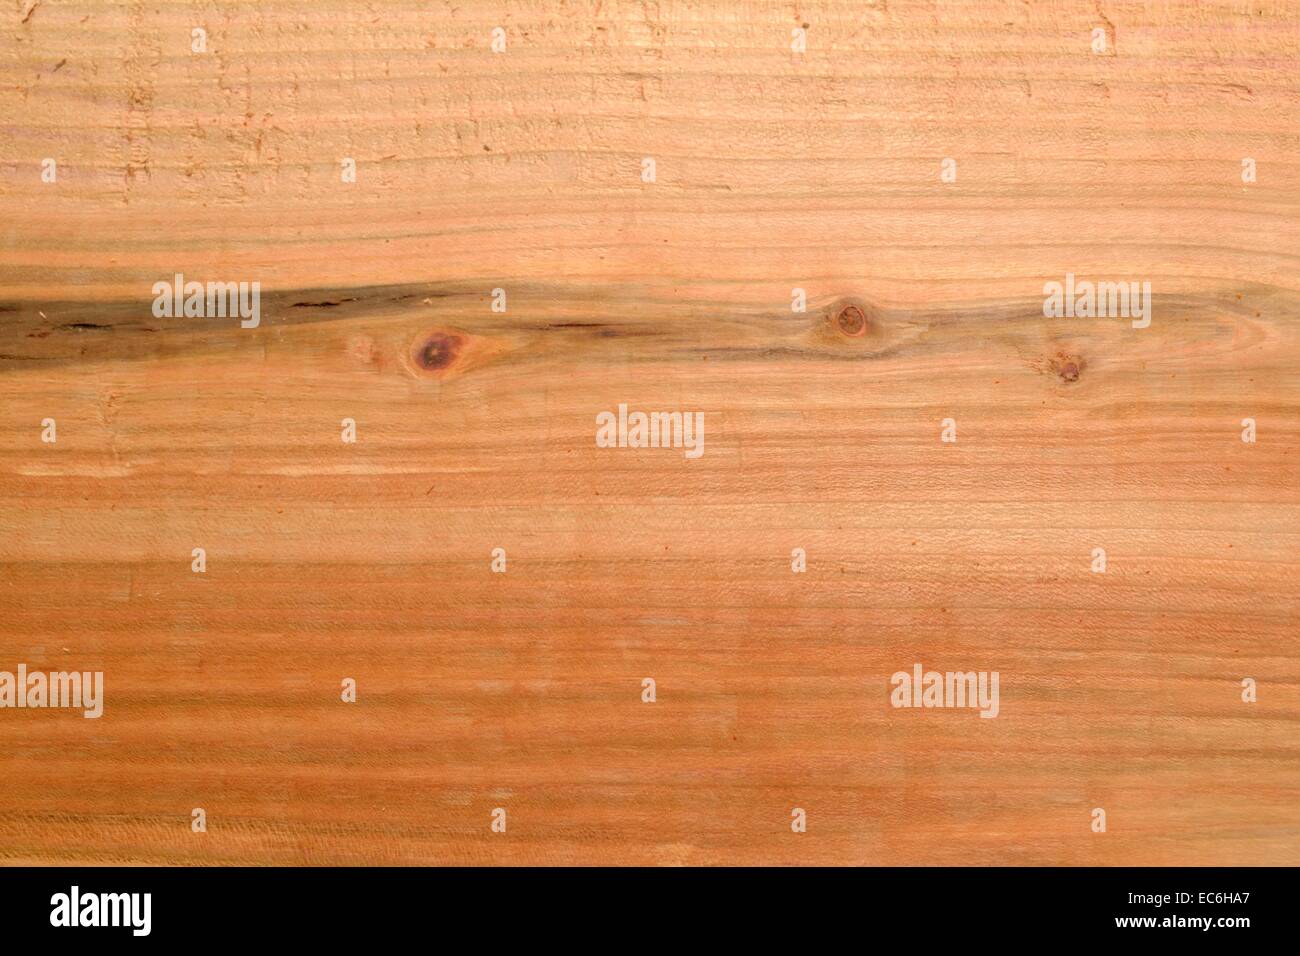 Plums wooden board with beautiful surface texture Stock Photo